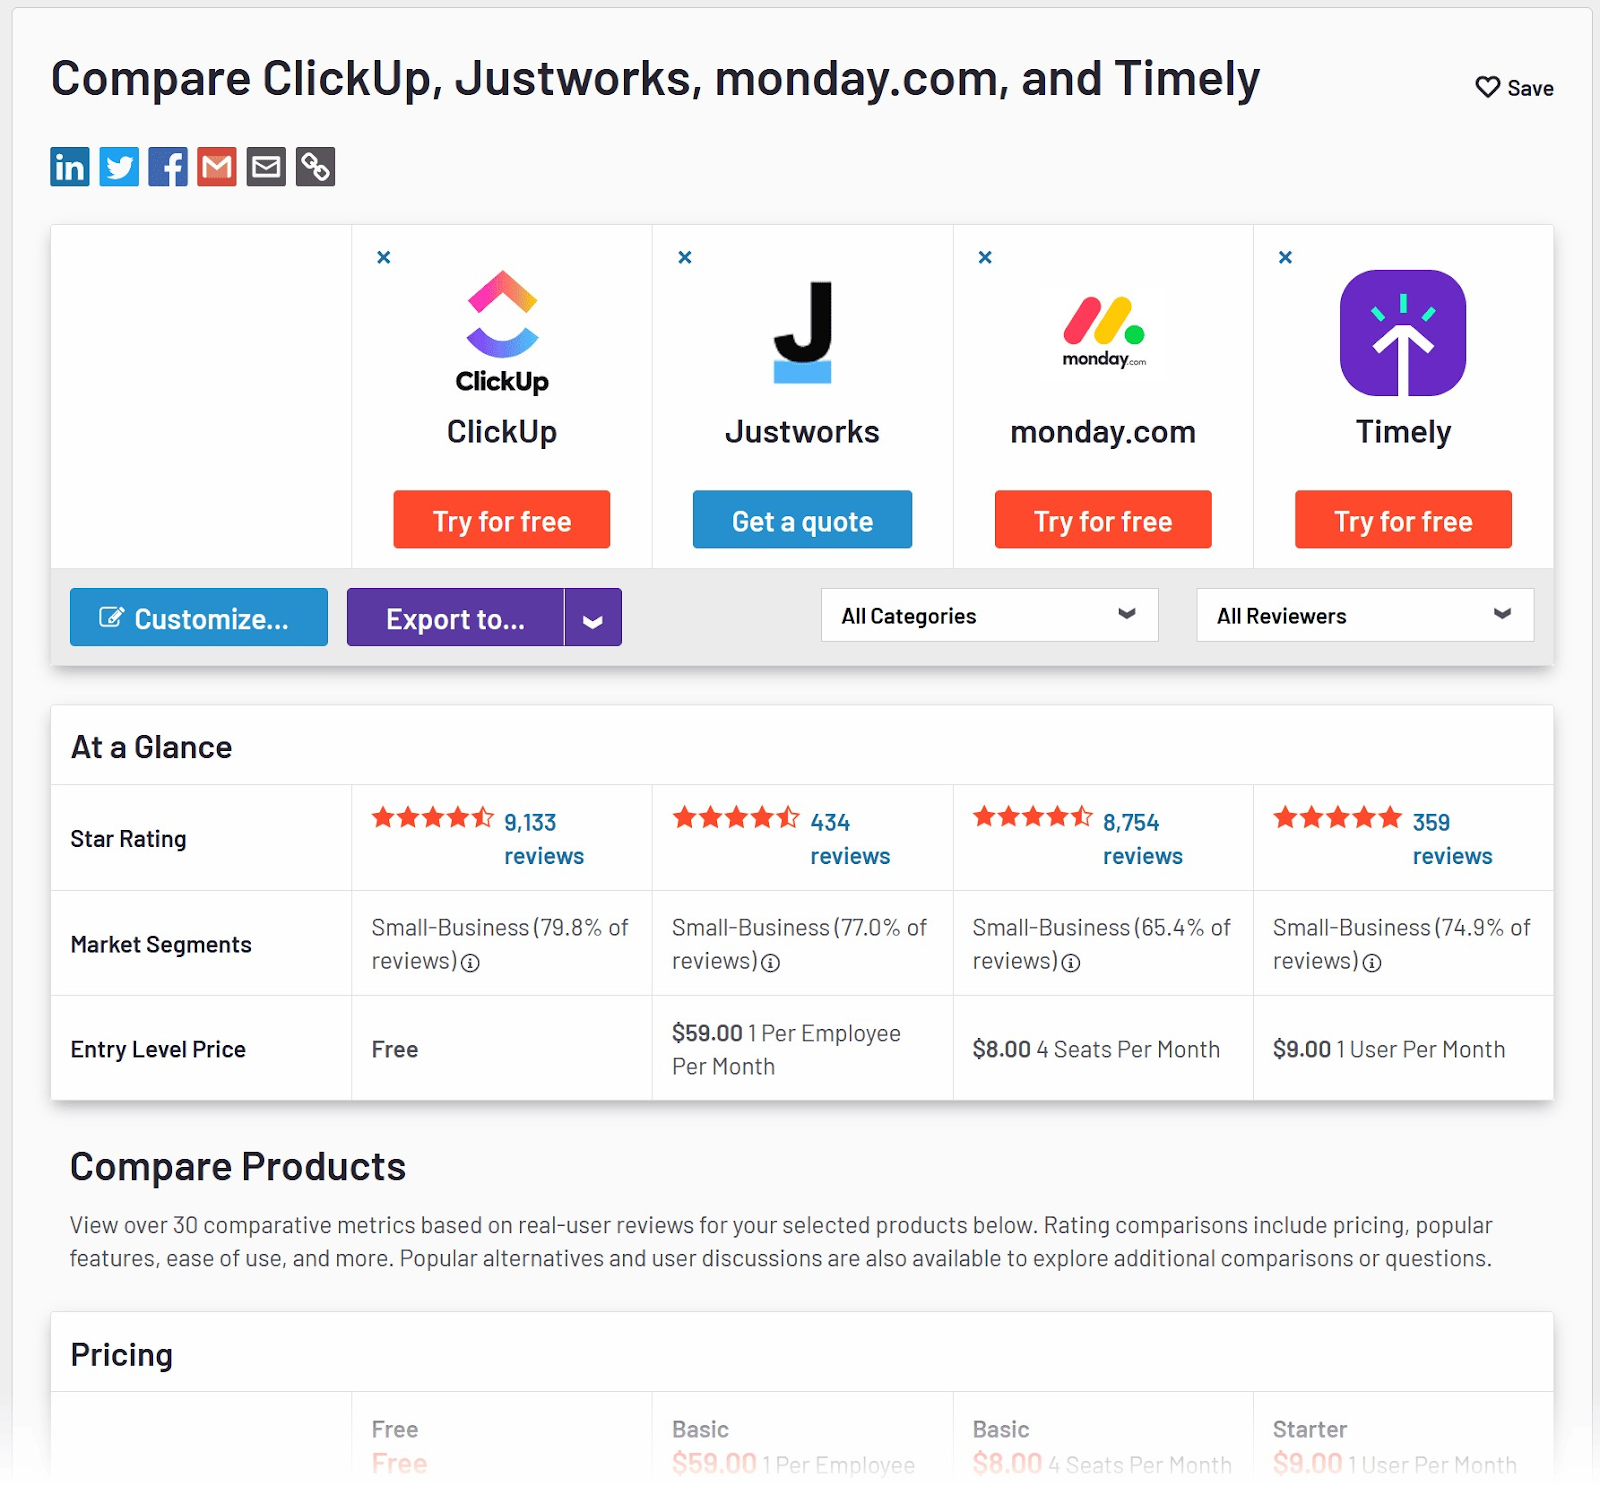 G2's comparison results of ClickUp, Justworks, monday.com and Timely